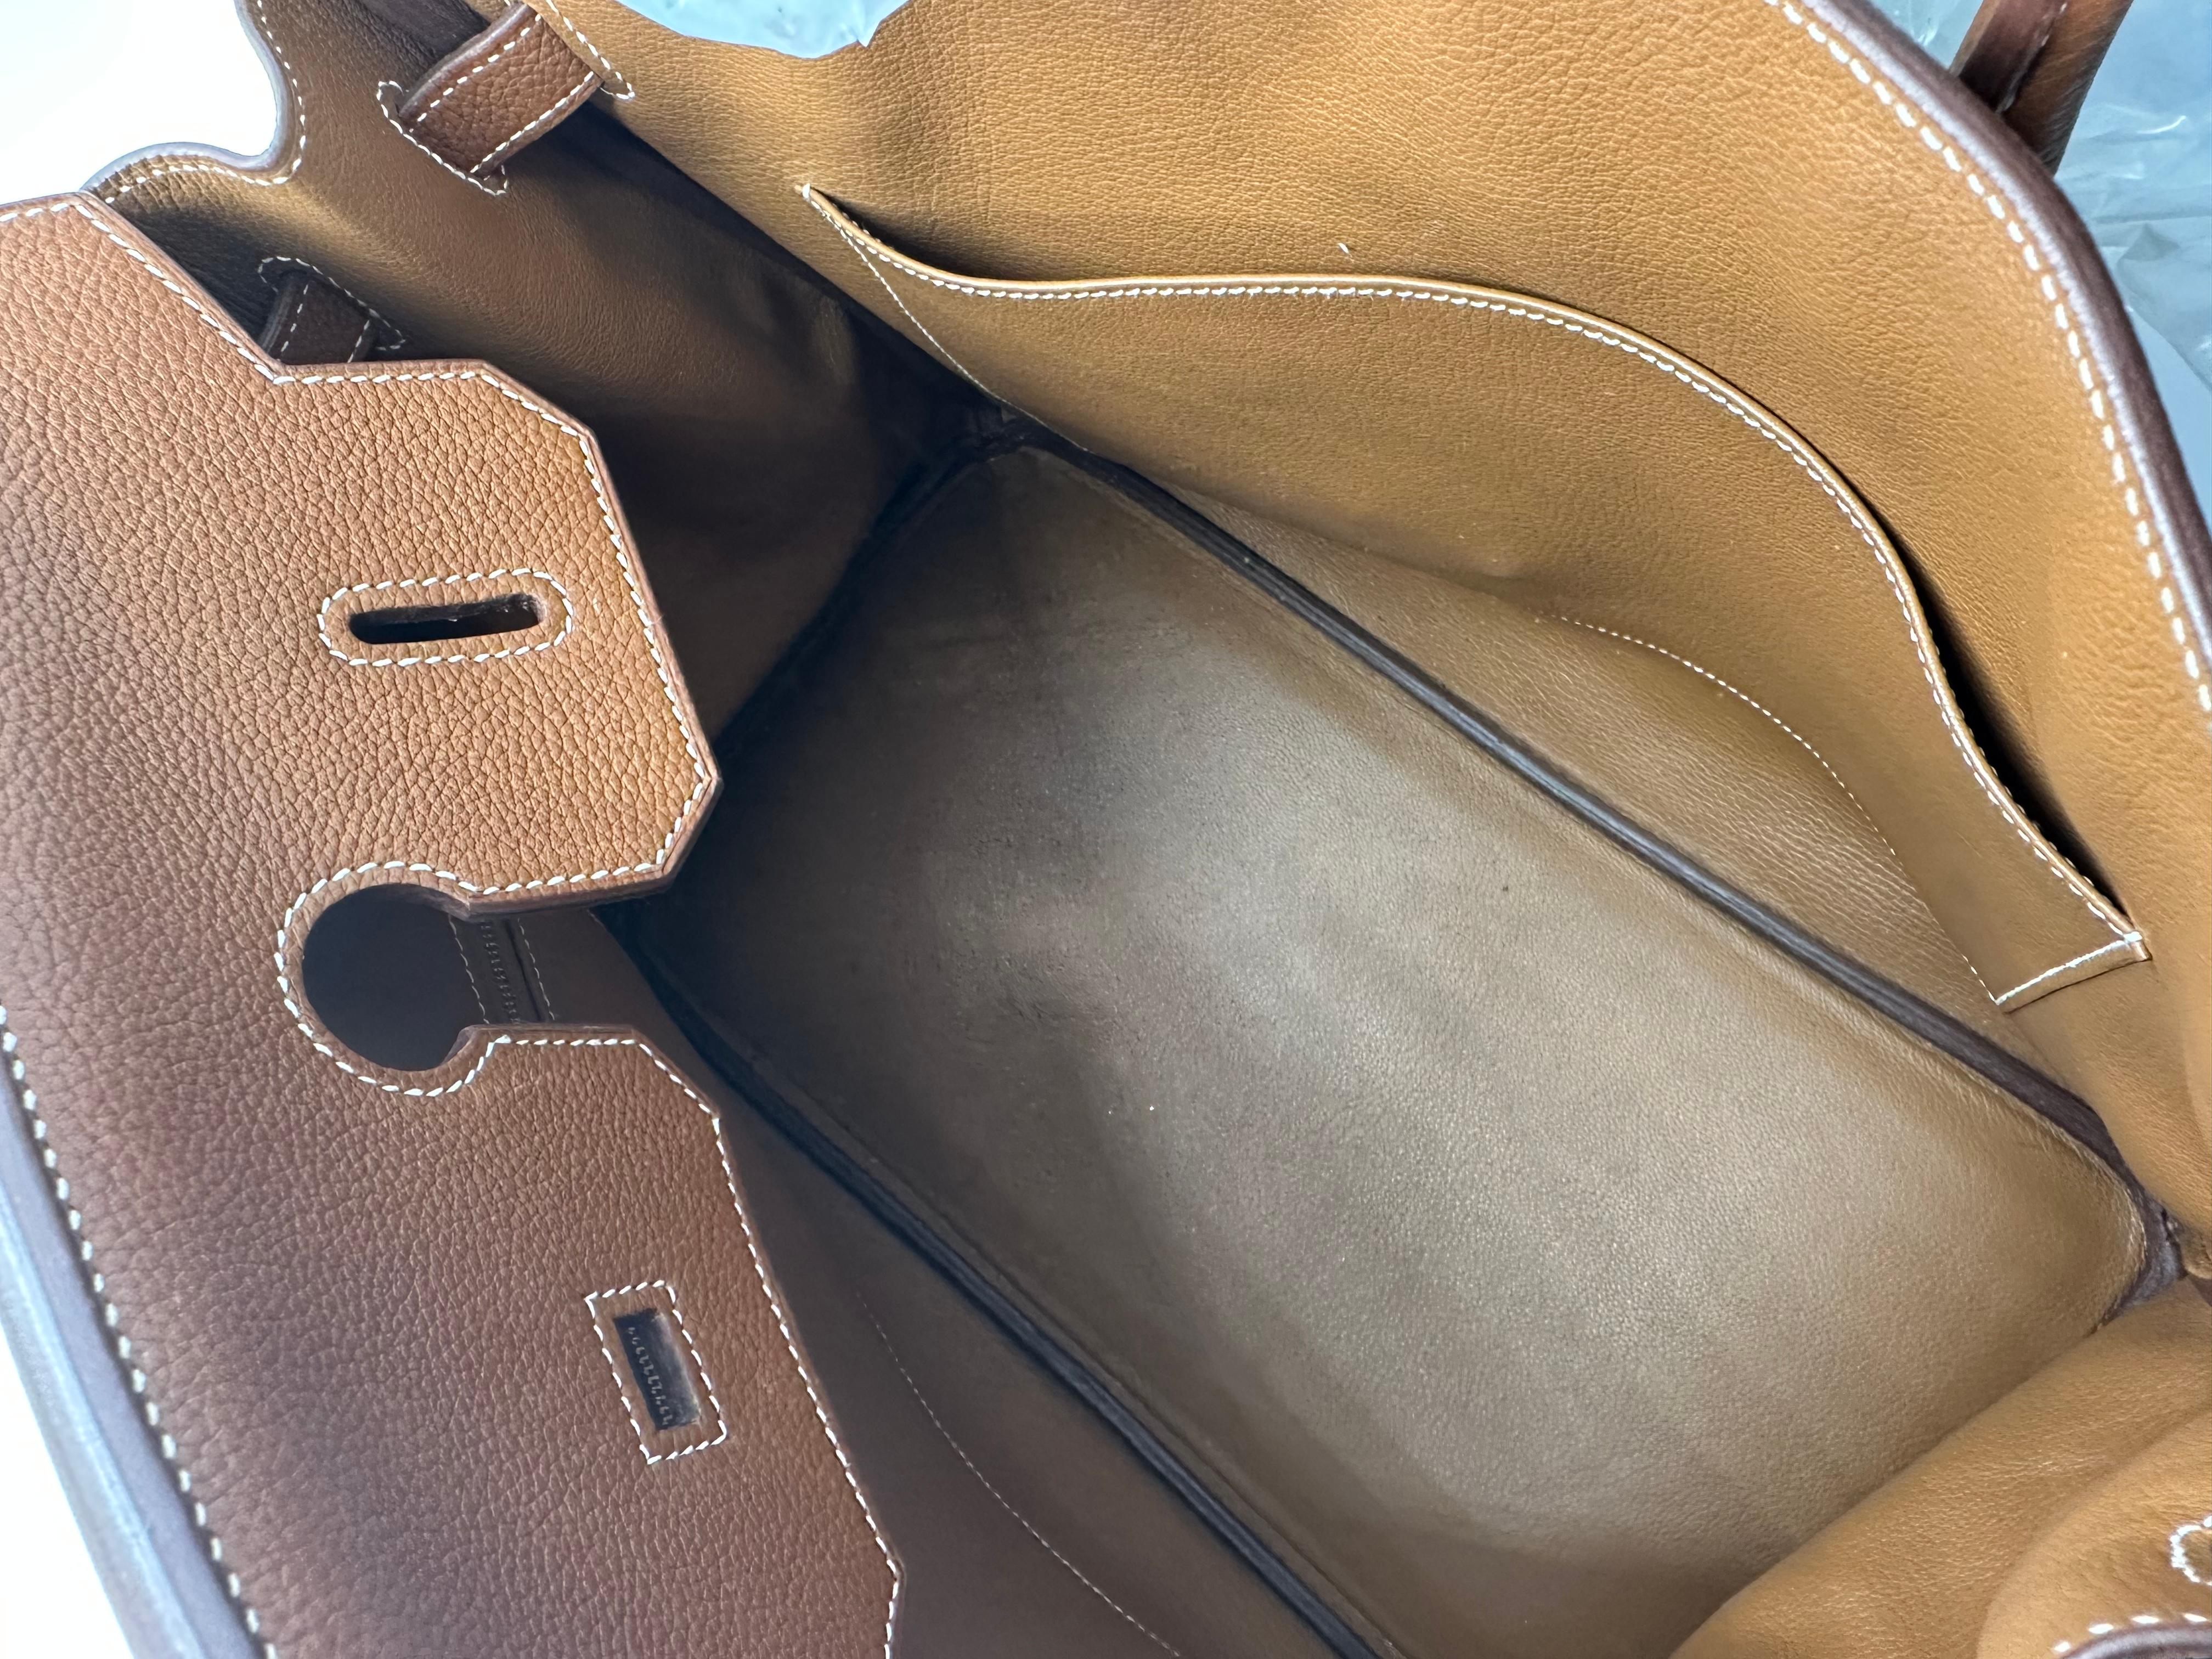 Hermès Birkin35 Fauve Barenia Faubourg bag In Excellent Condition For Sale In London, England